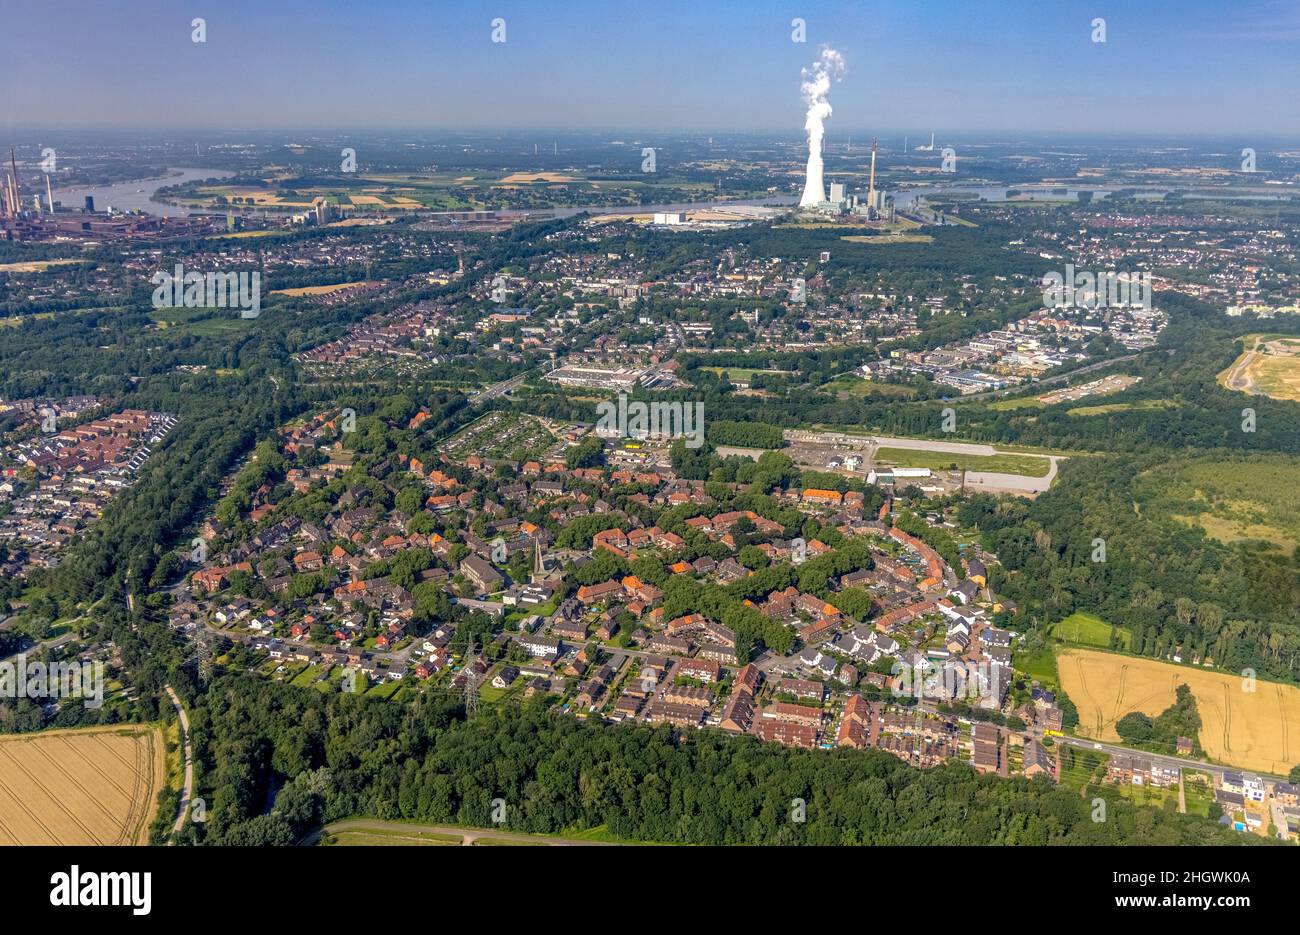 Aerial view, local view Wehofen with STEAG combined heat and power plant Walsum, development and new warehouses logport VI, river Rhine, district Weho Stock Photo